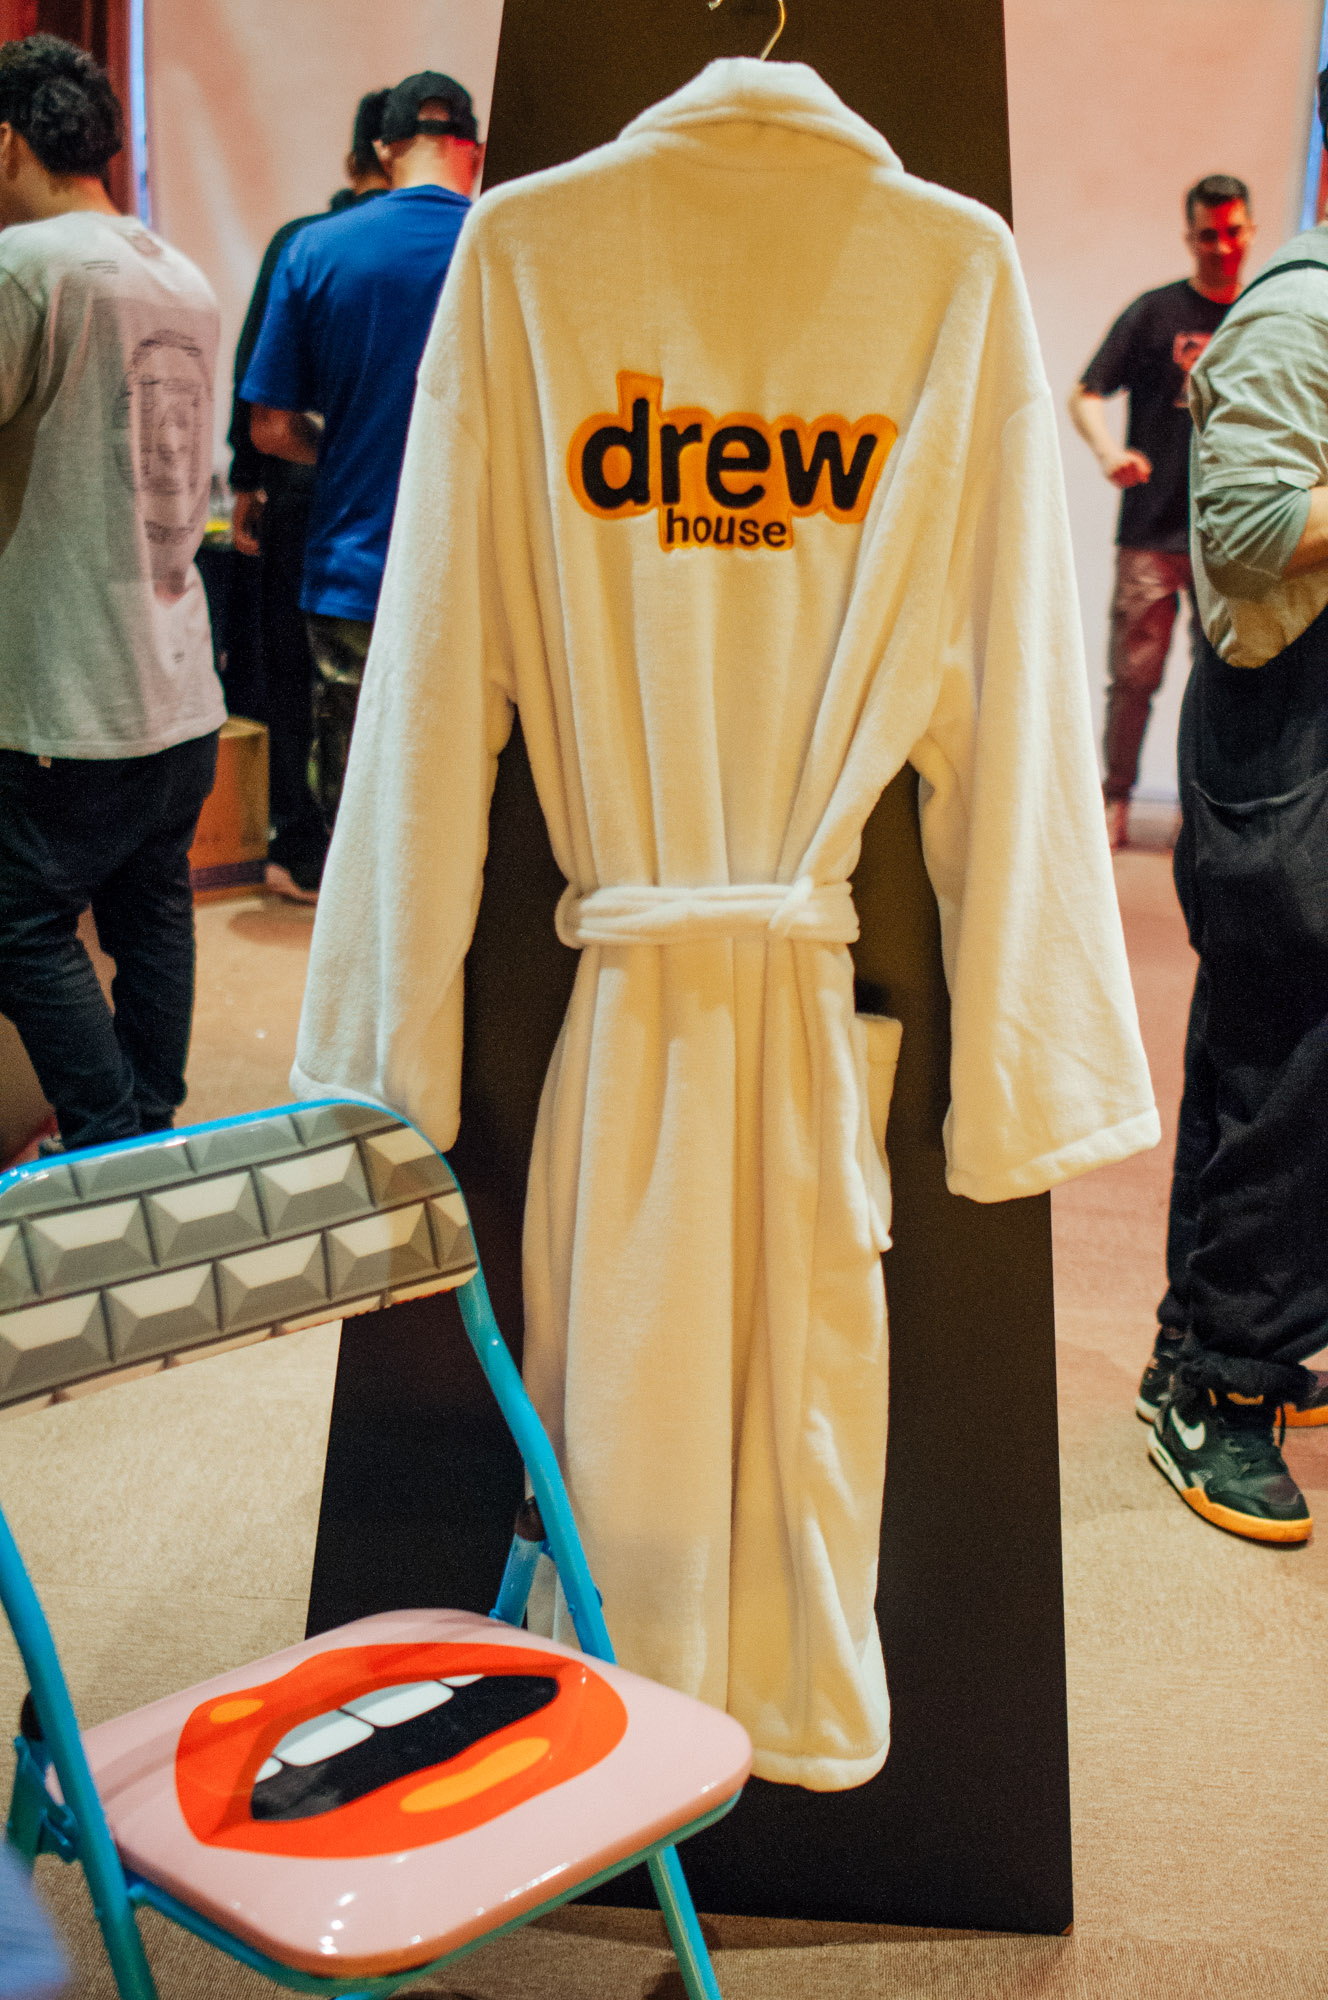 Justin Bieber's Fashion Label Drew House Launches on Alibaba's Tmall